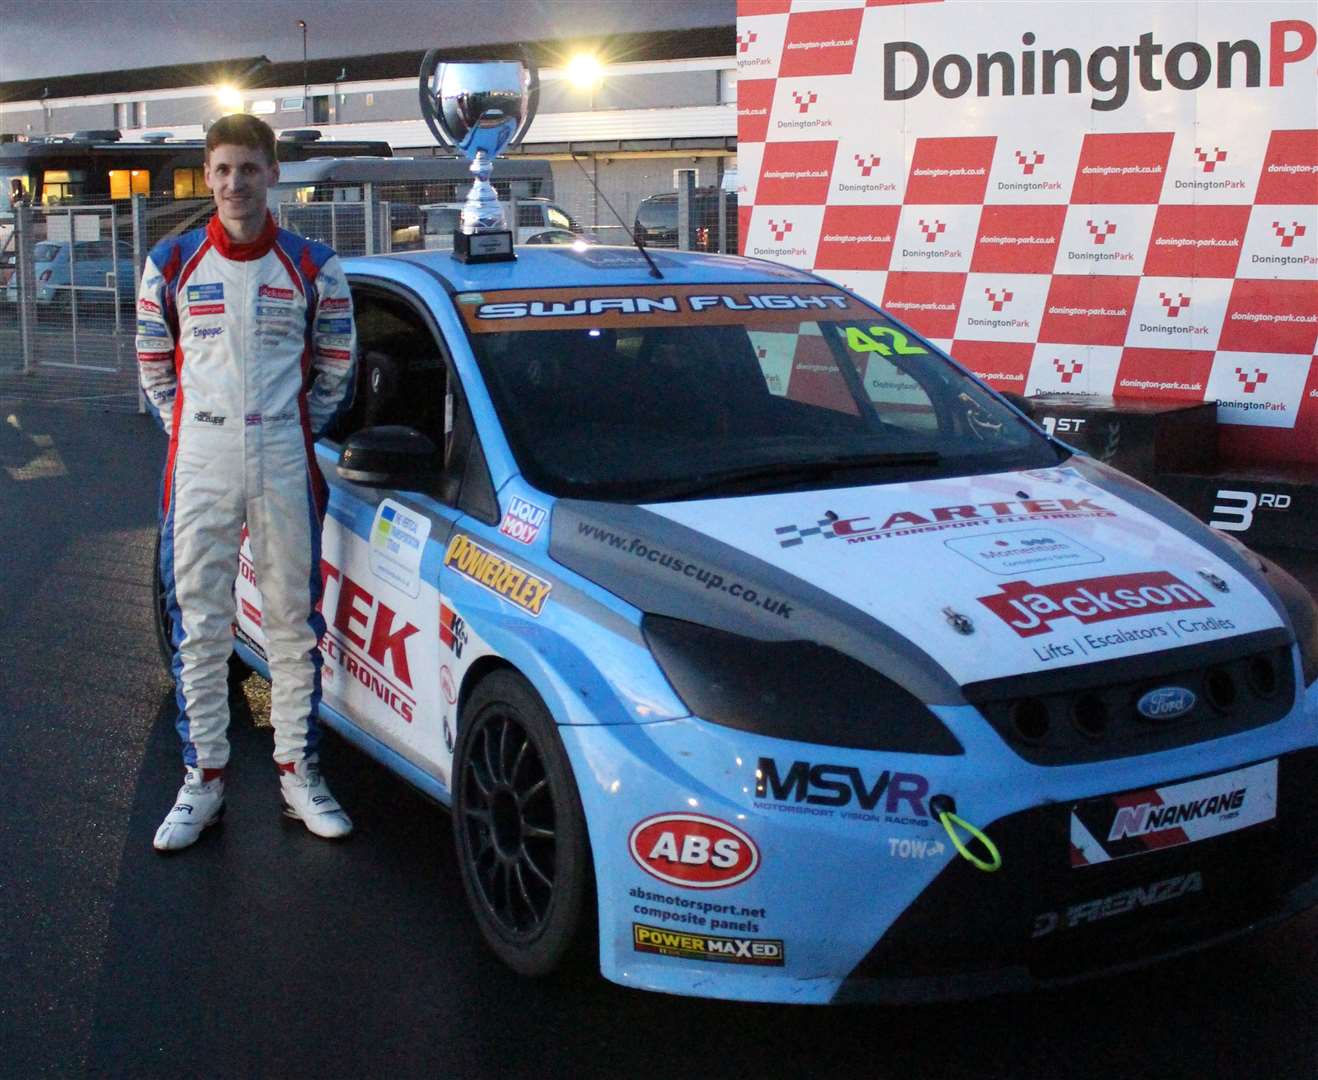 Simon Rudd sealed the Focus Cup title at Donington Park